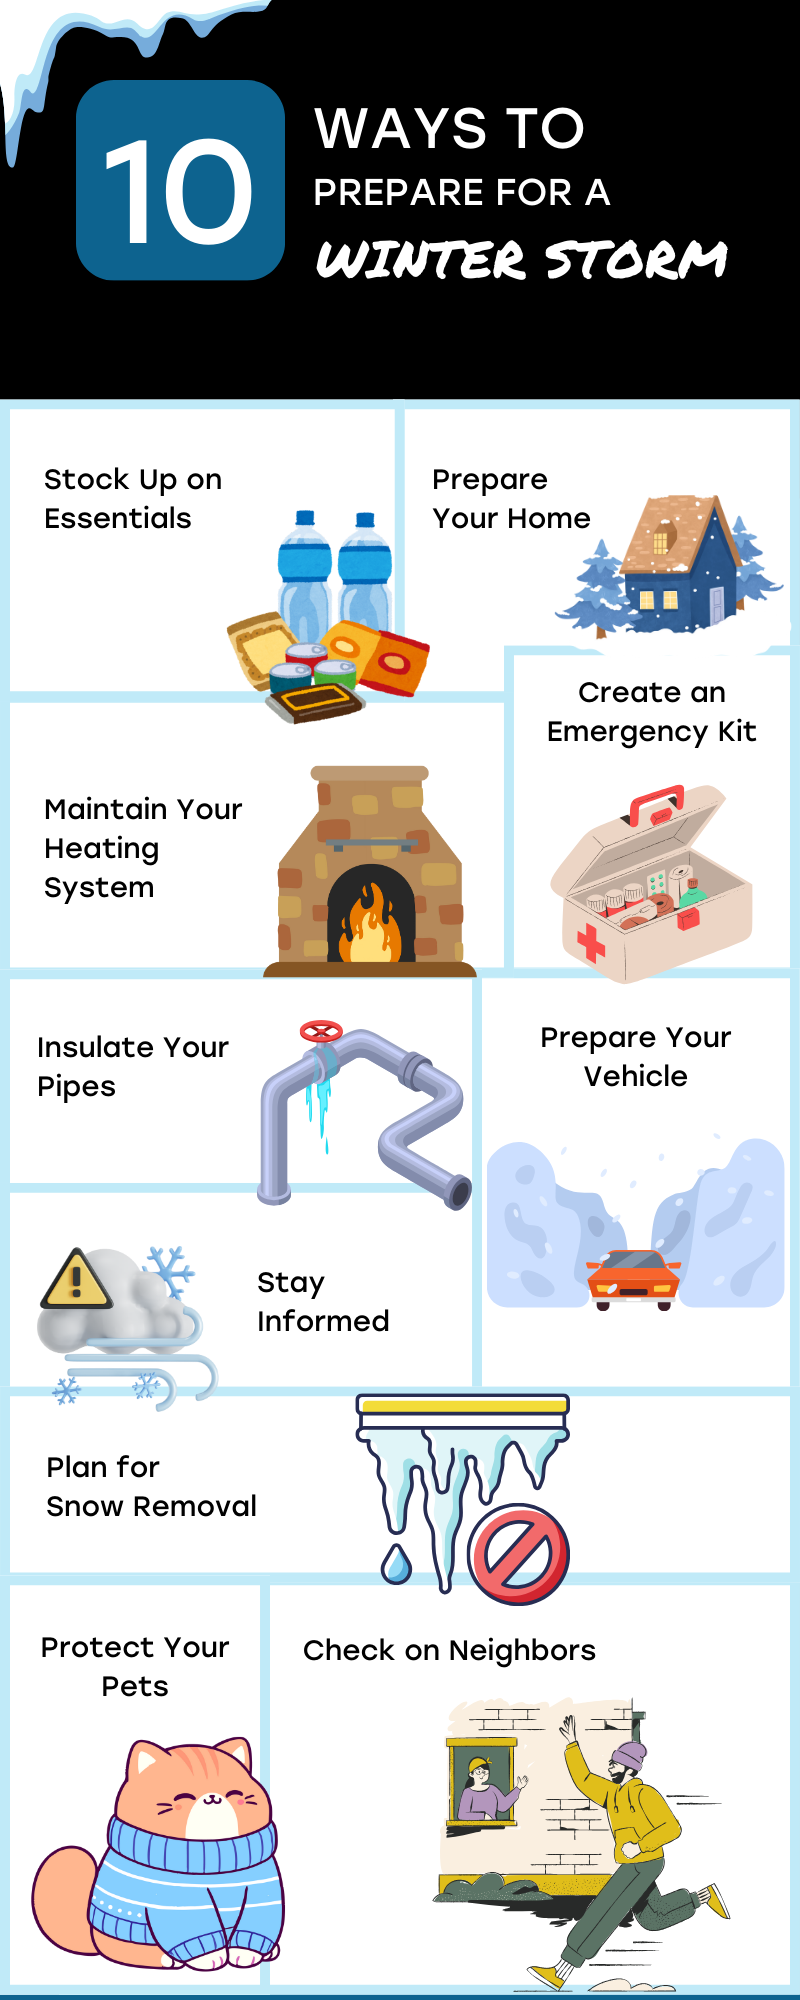 10 Ways to Prepare for a Winter Storm: What You Need to Know